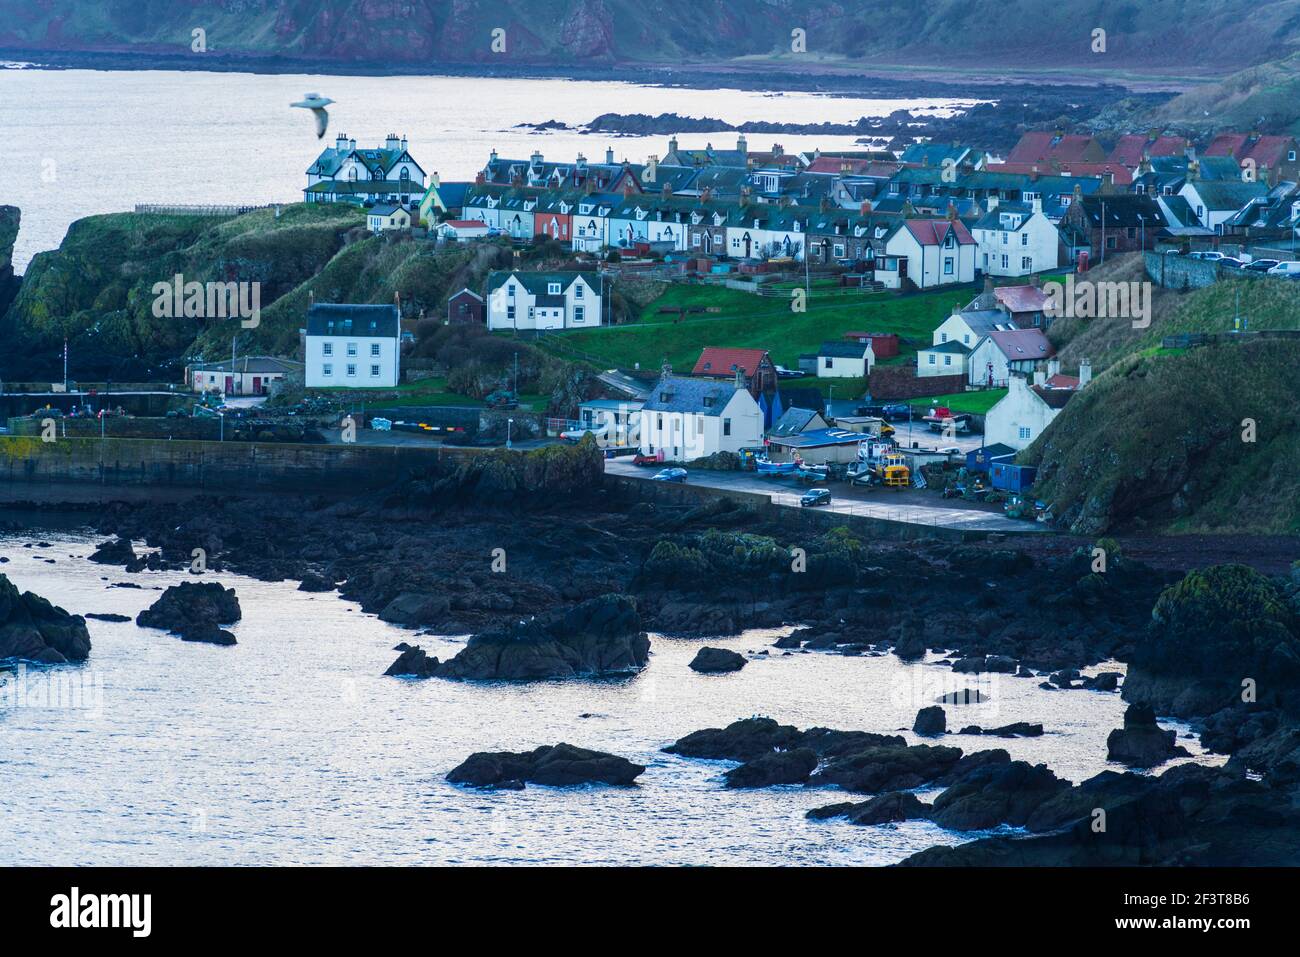 St Abbs, Berwickshire, Scotland - North Sea fishing village and nature reserve. View from clifftop walk. Stock Photo